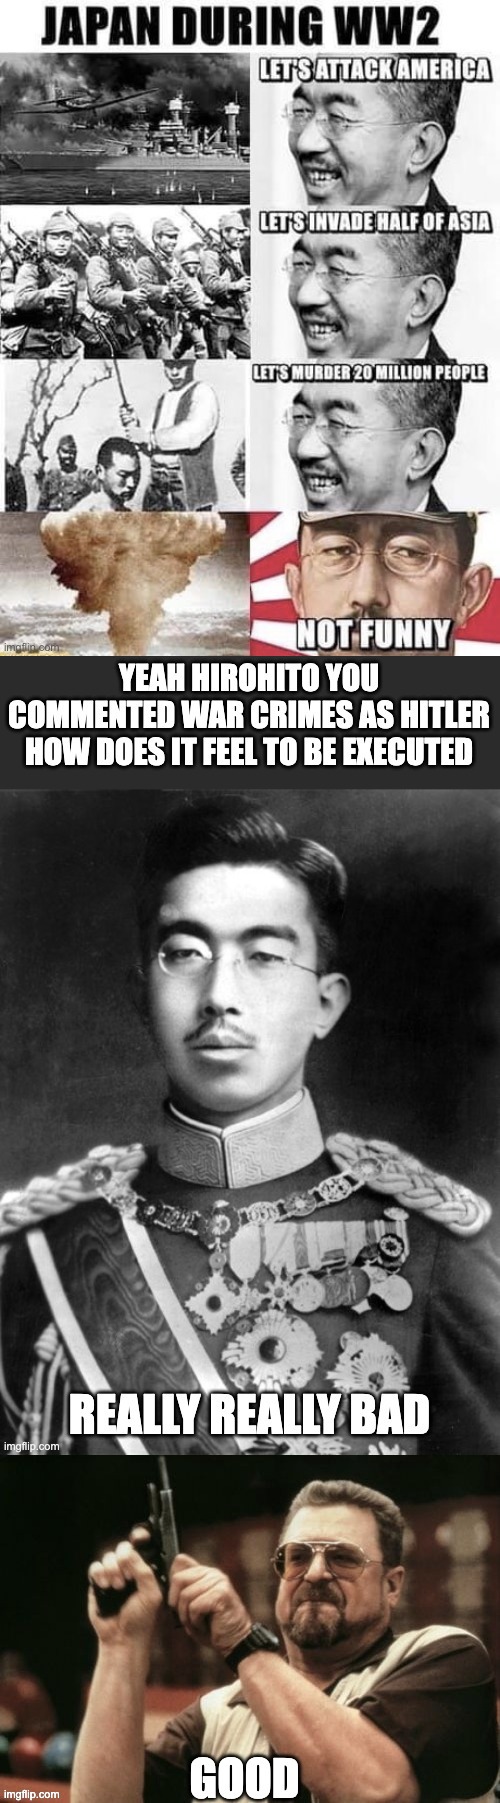 Hirohito how does it feel to be executed | image tagged in hirohito's war crimes | made w/ Imgflip meme maker